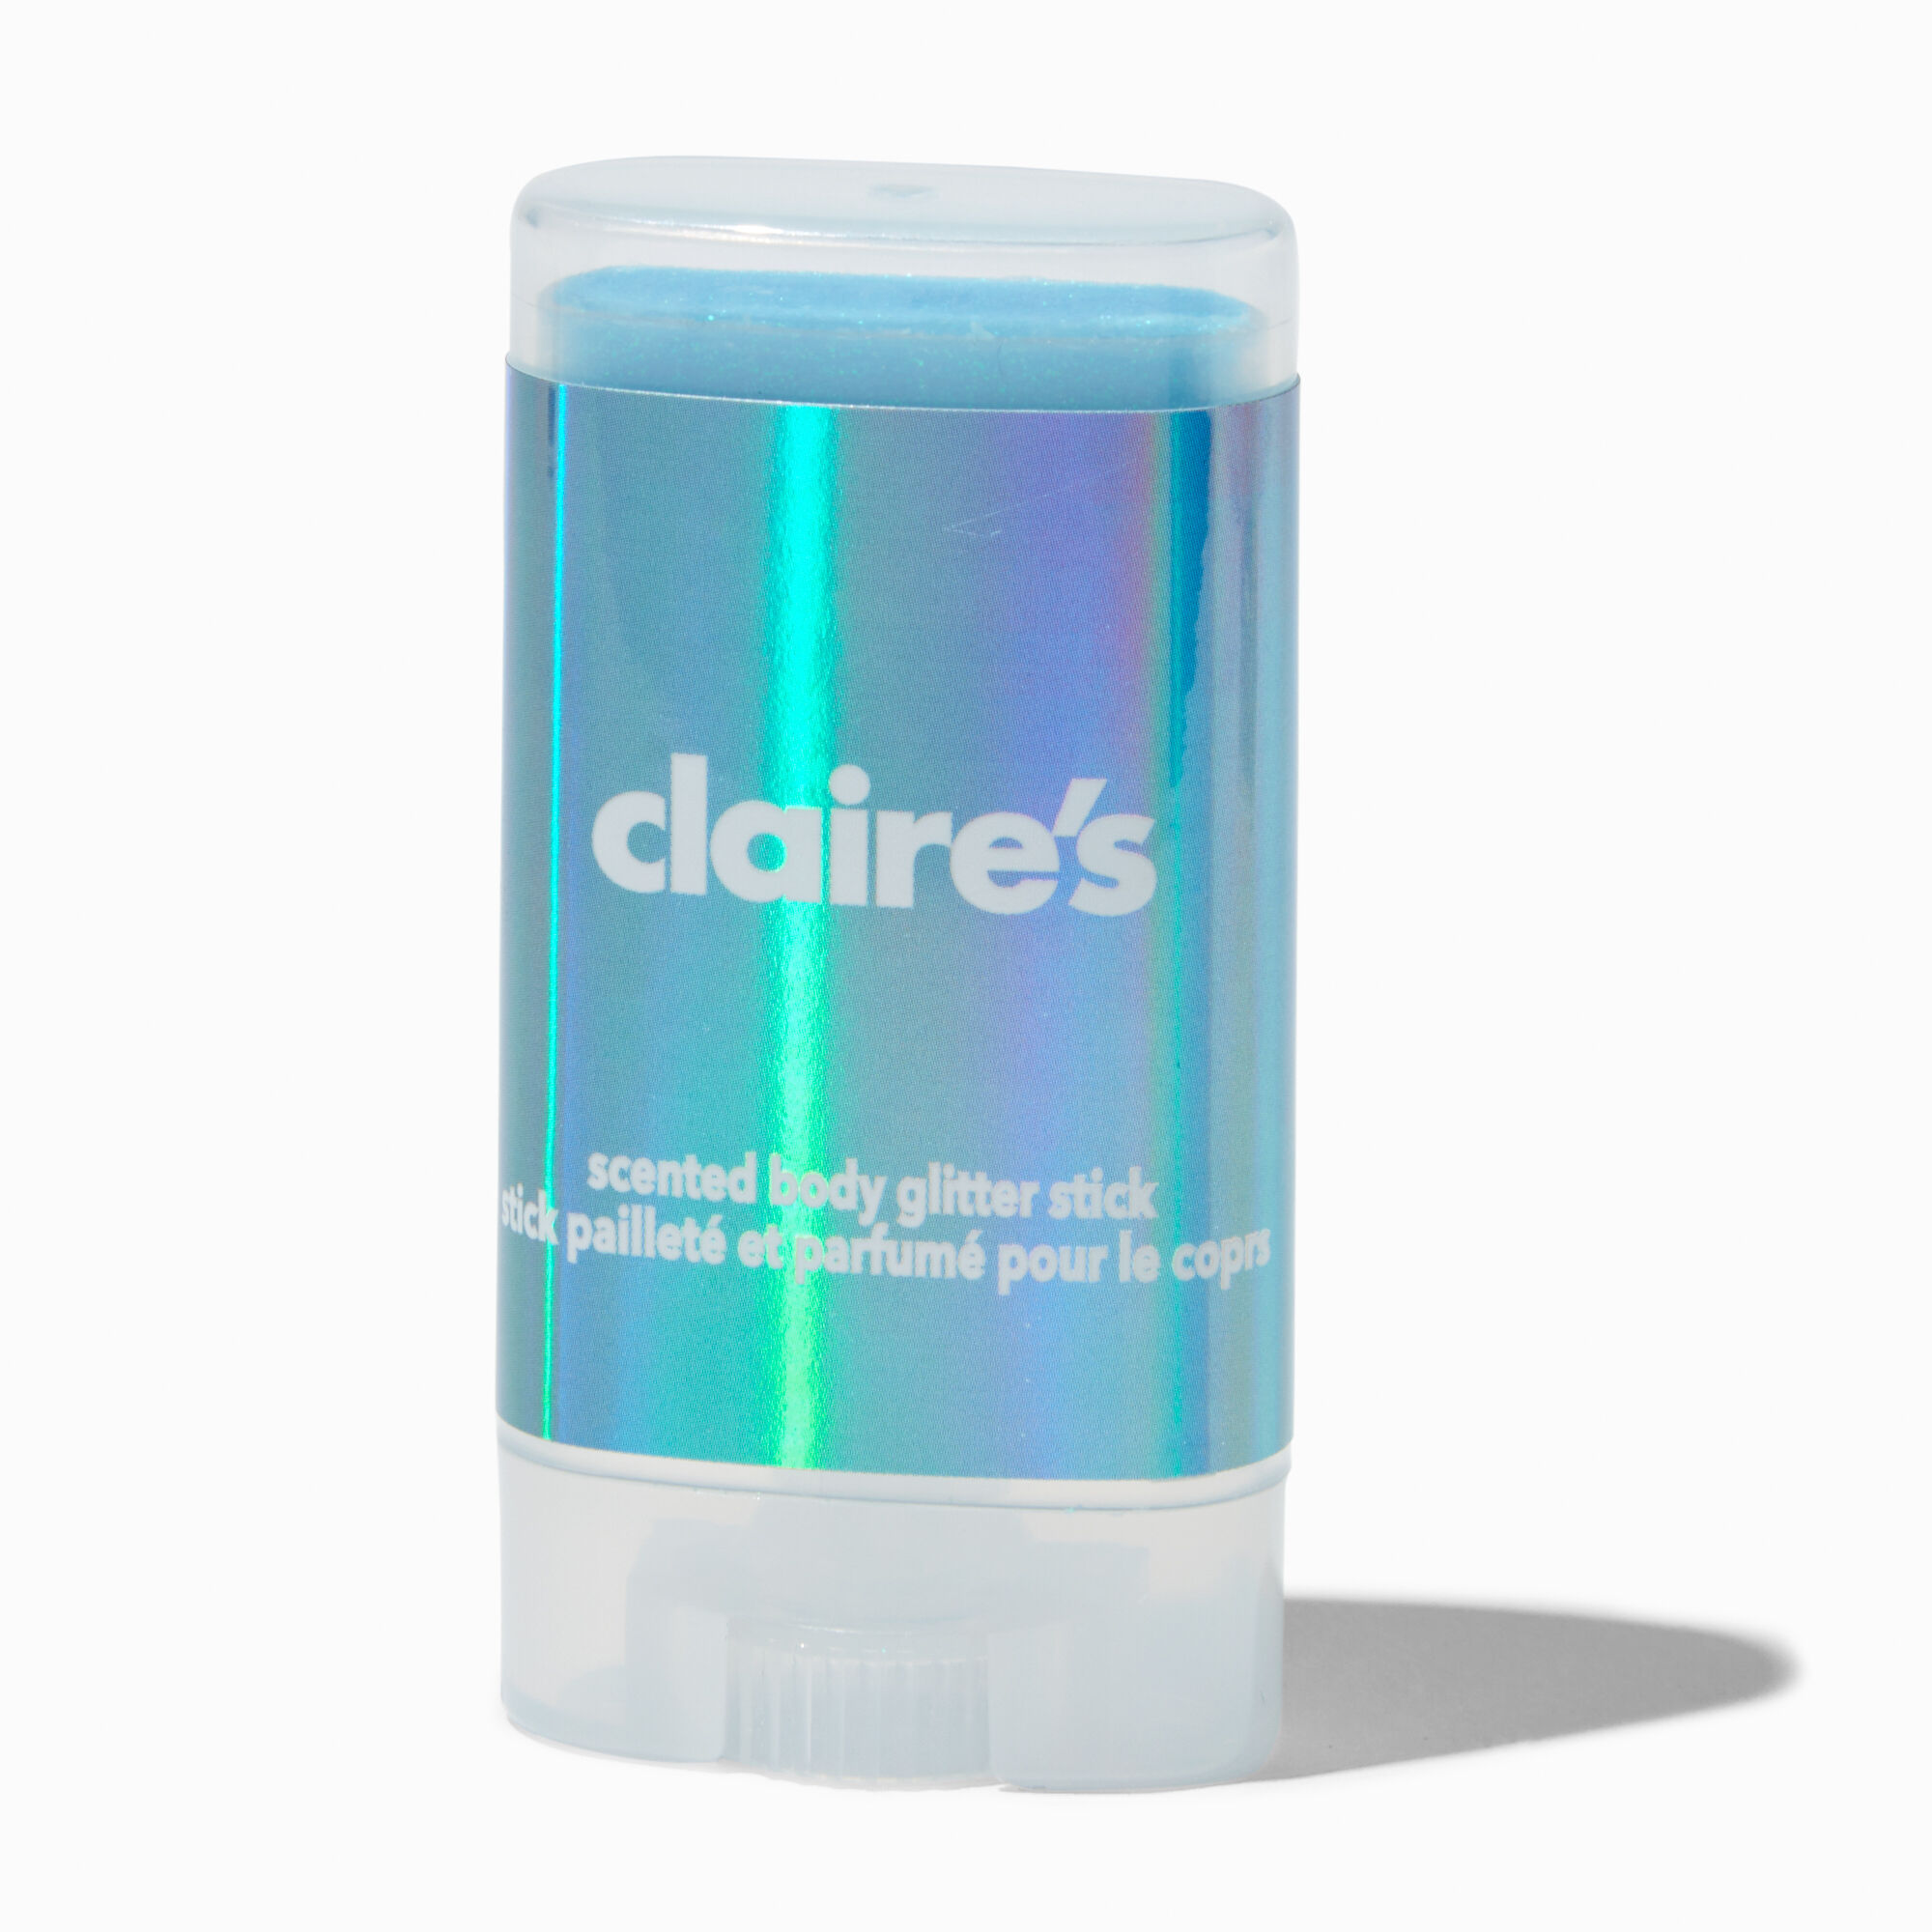 View Claires Scented Body Glitter Stick Blue information